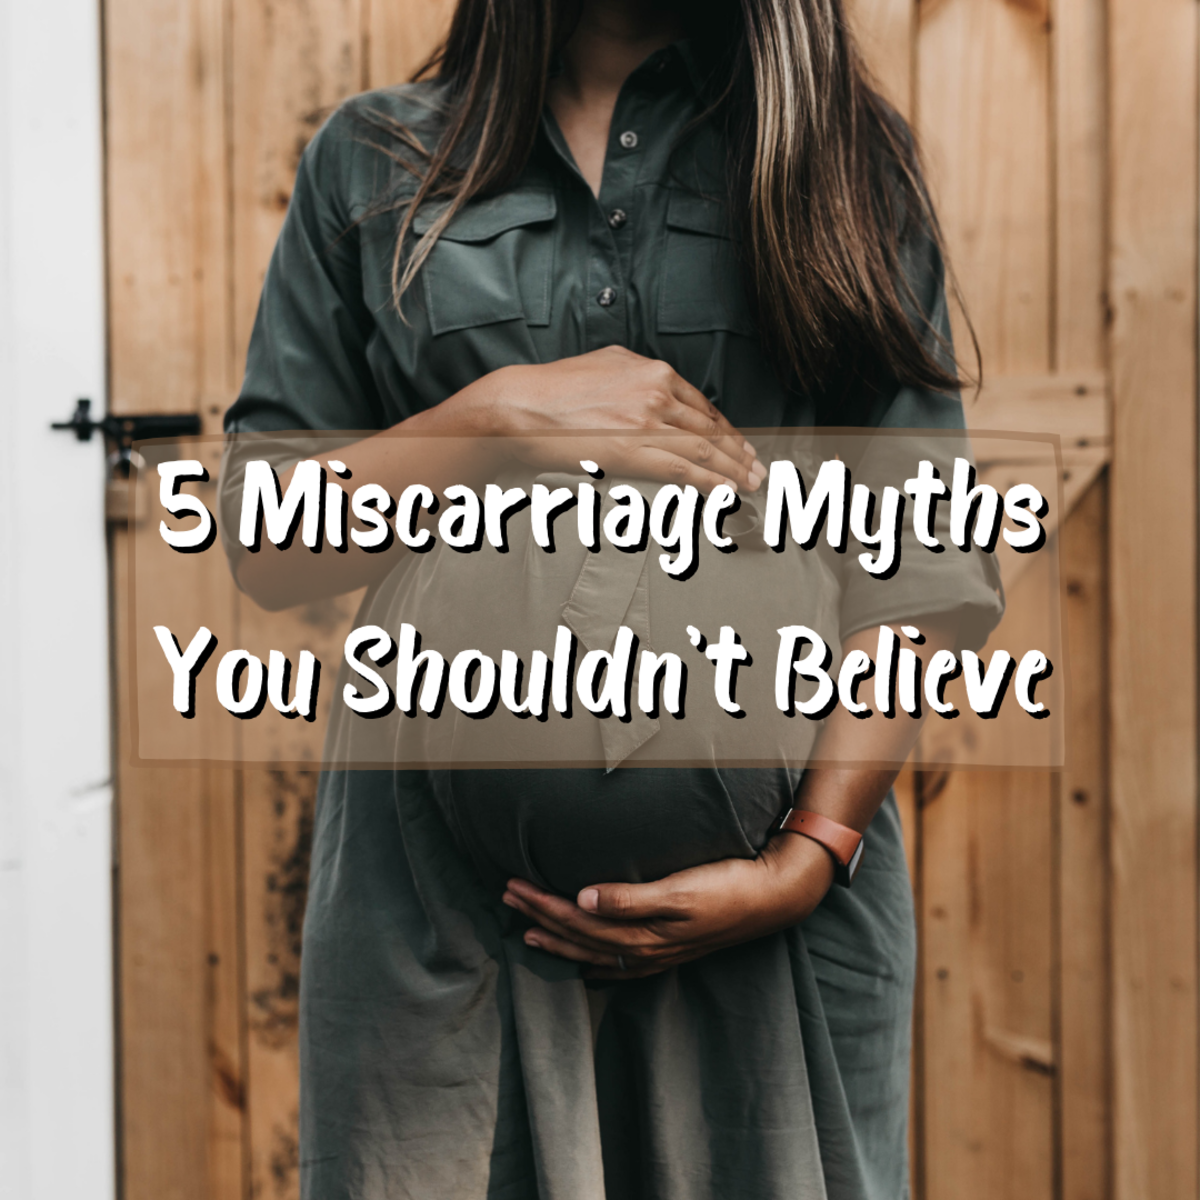 Read on to learn 5 myths about miscarriage that you need to stop believing, especially if you are expecting.